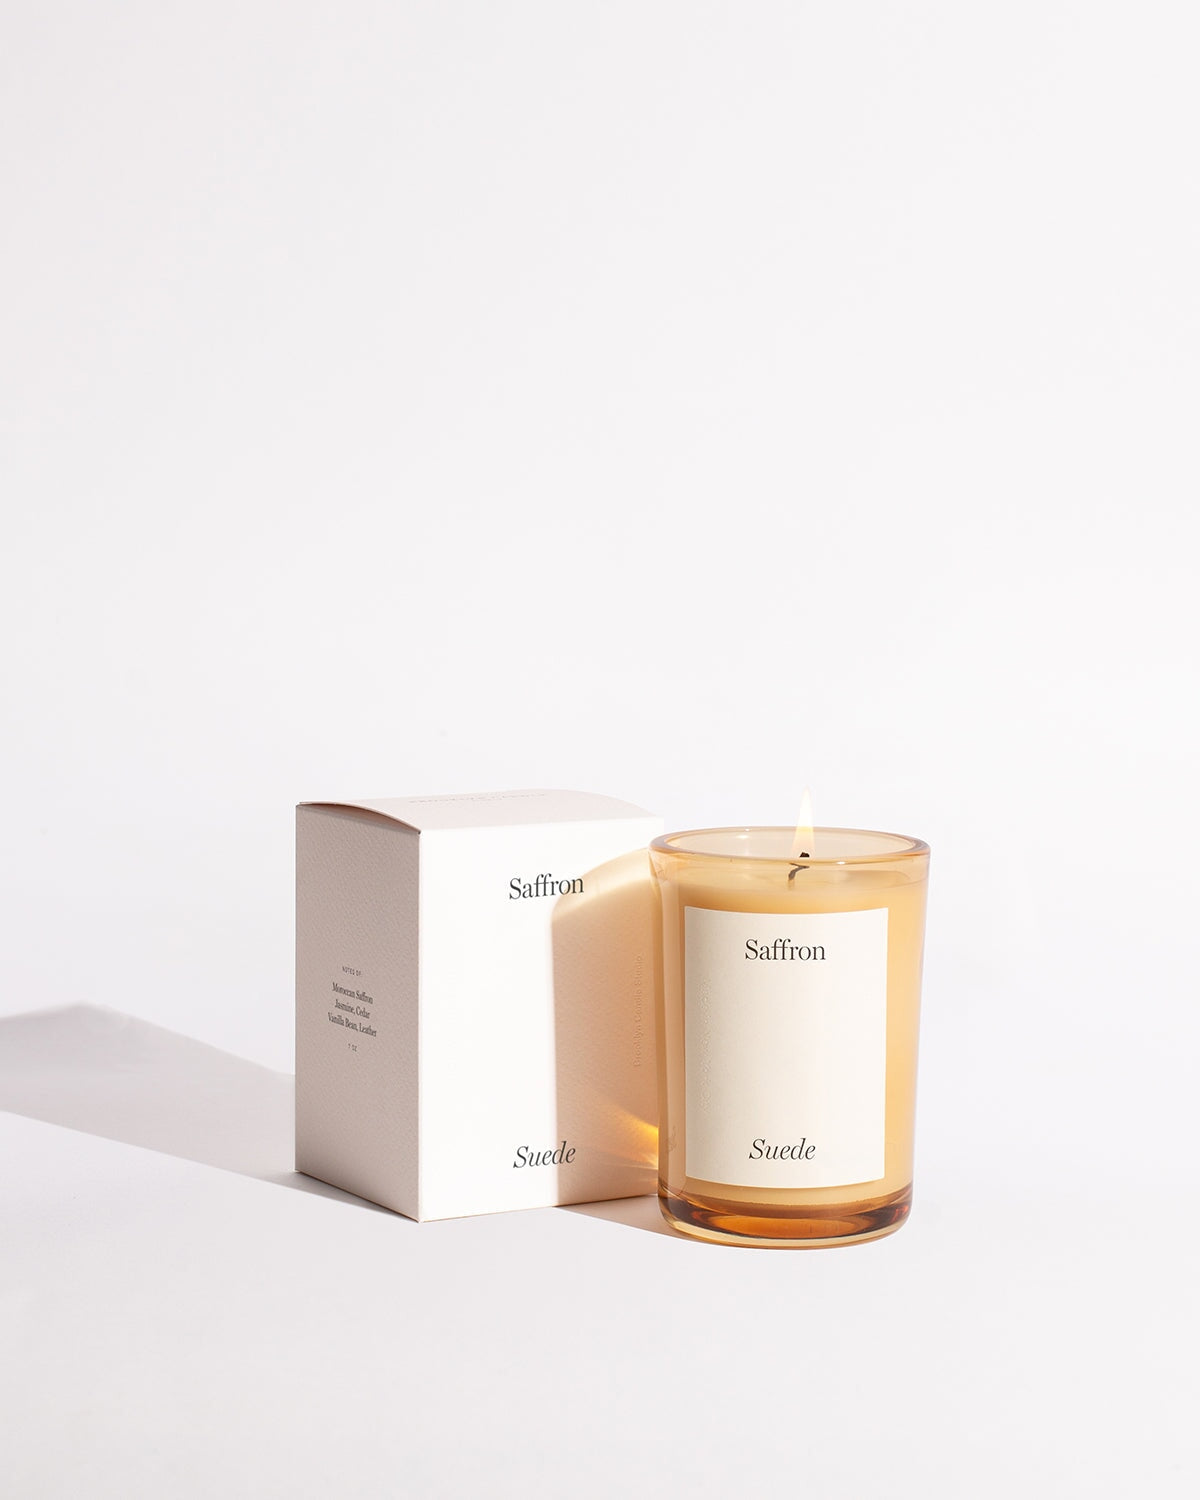 Limited Edition Saffron Suede Candle Limited Edition Brooklyn Candle Studio 